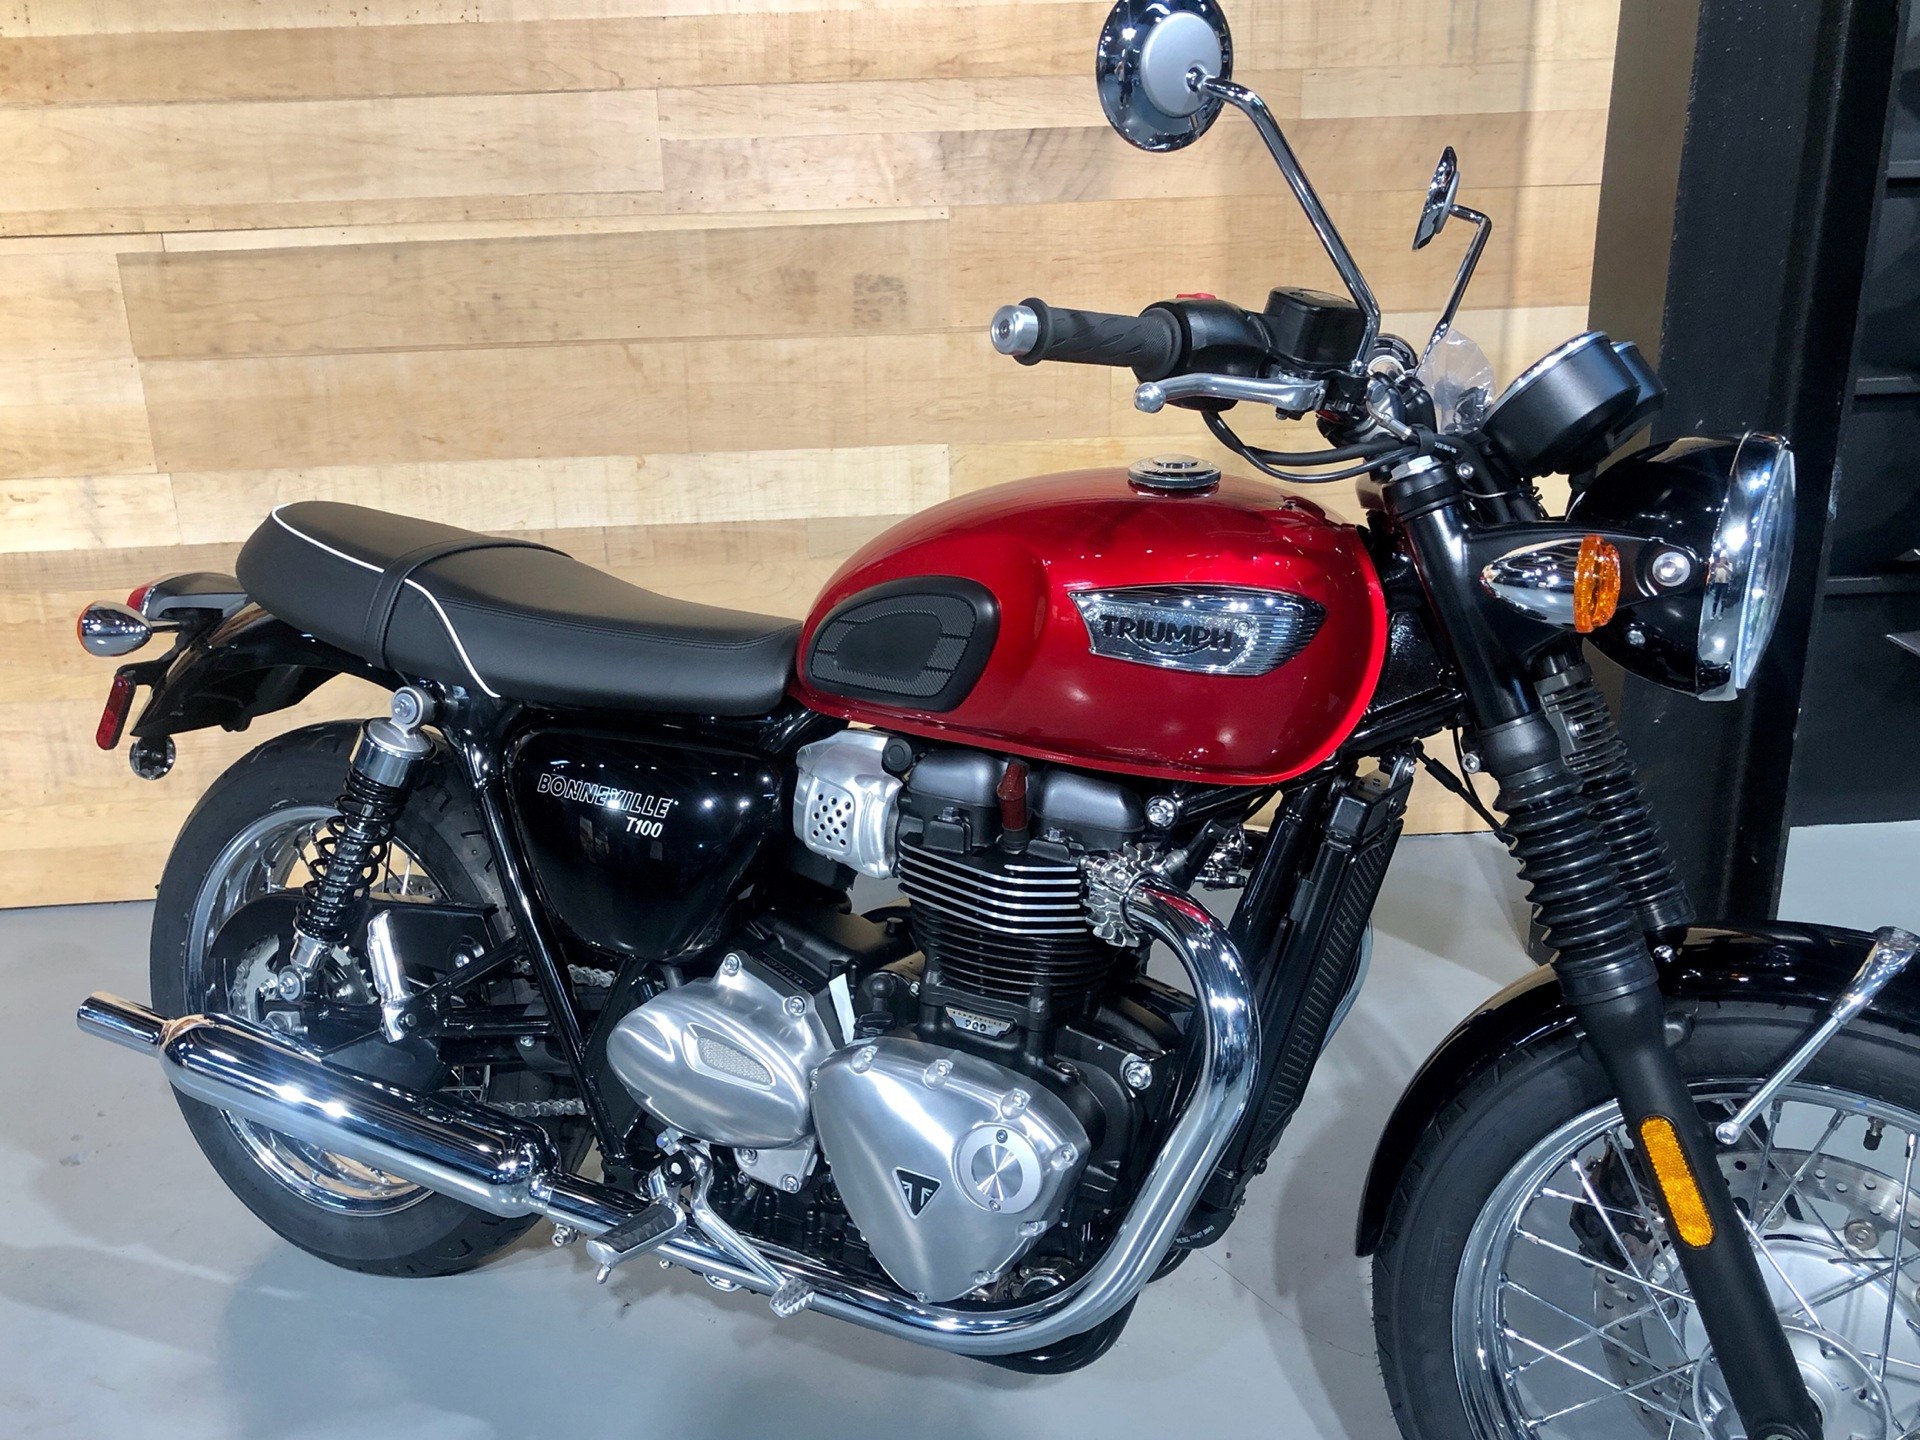 New 2020 Triumph Bonneville T100 Motorcycles in Enfield, CT | Stock